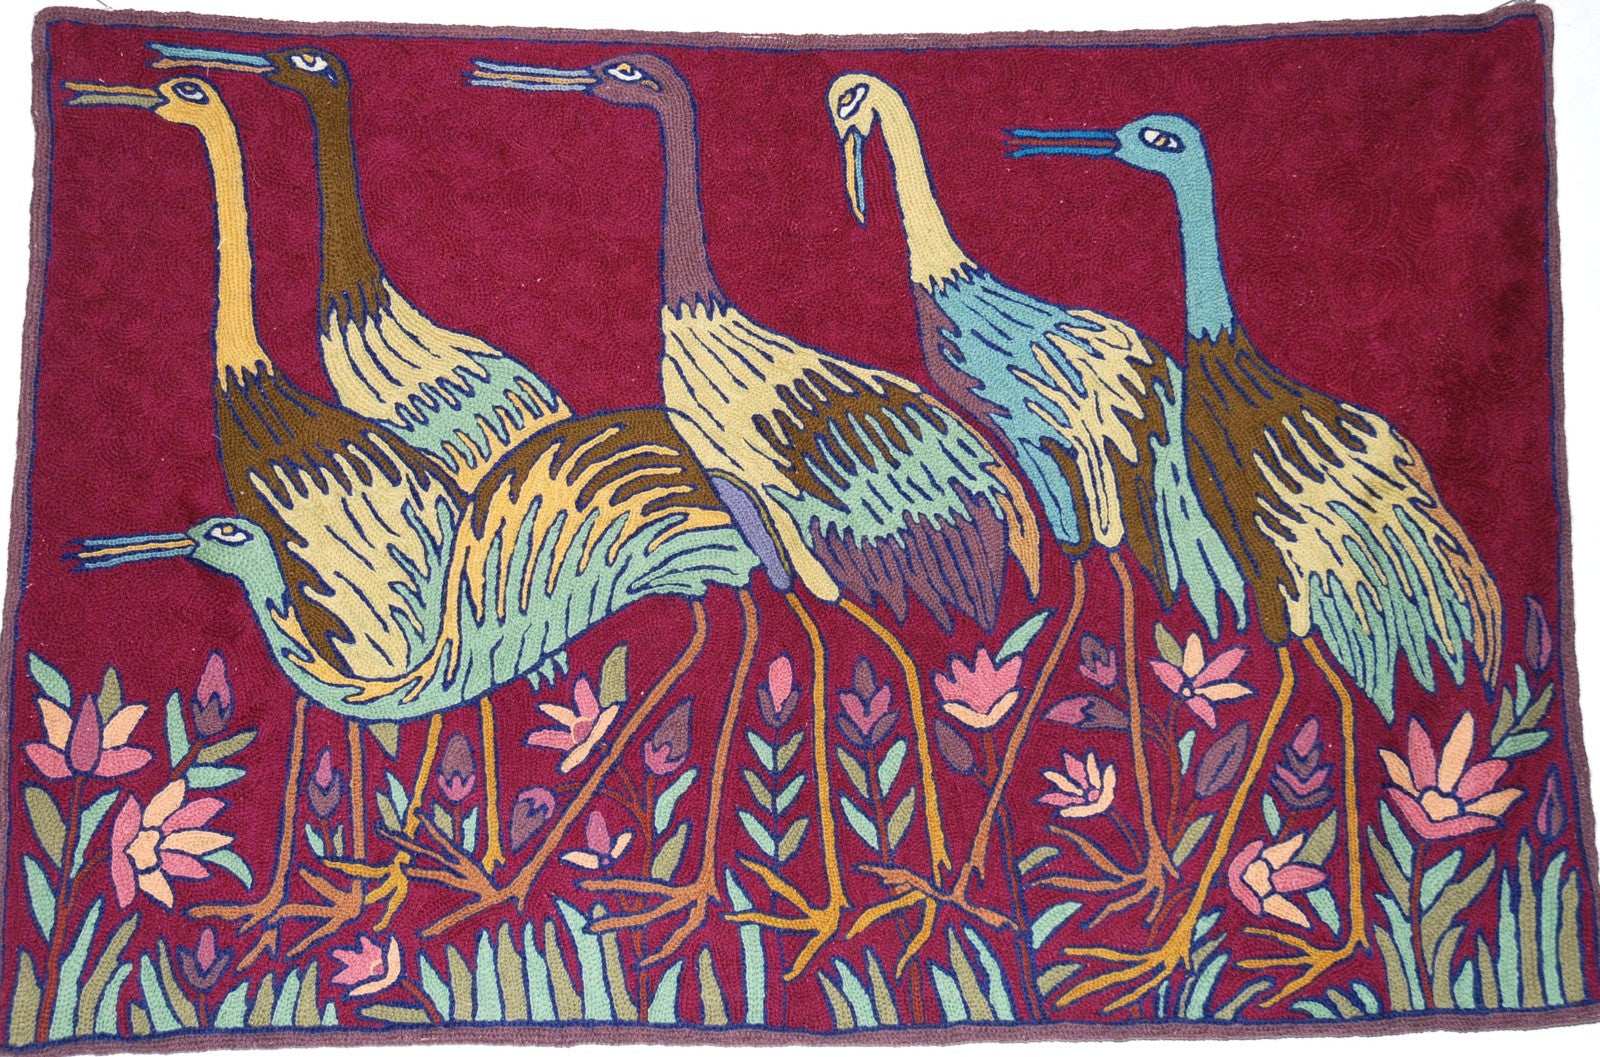 ChainStitch Tapestry Wall Hanging Area Rug Birds, Multicolor Embroidery 2x3 feet #CWR6111